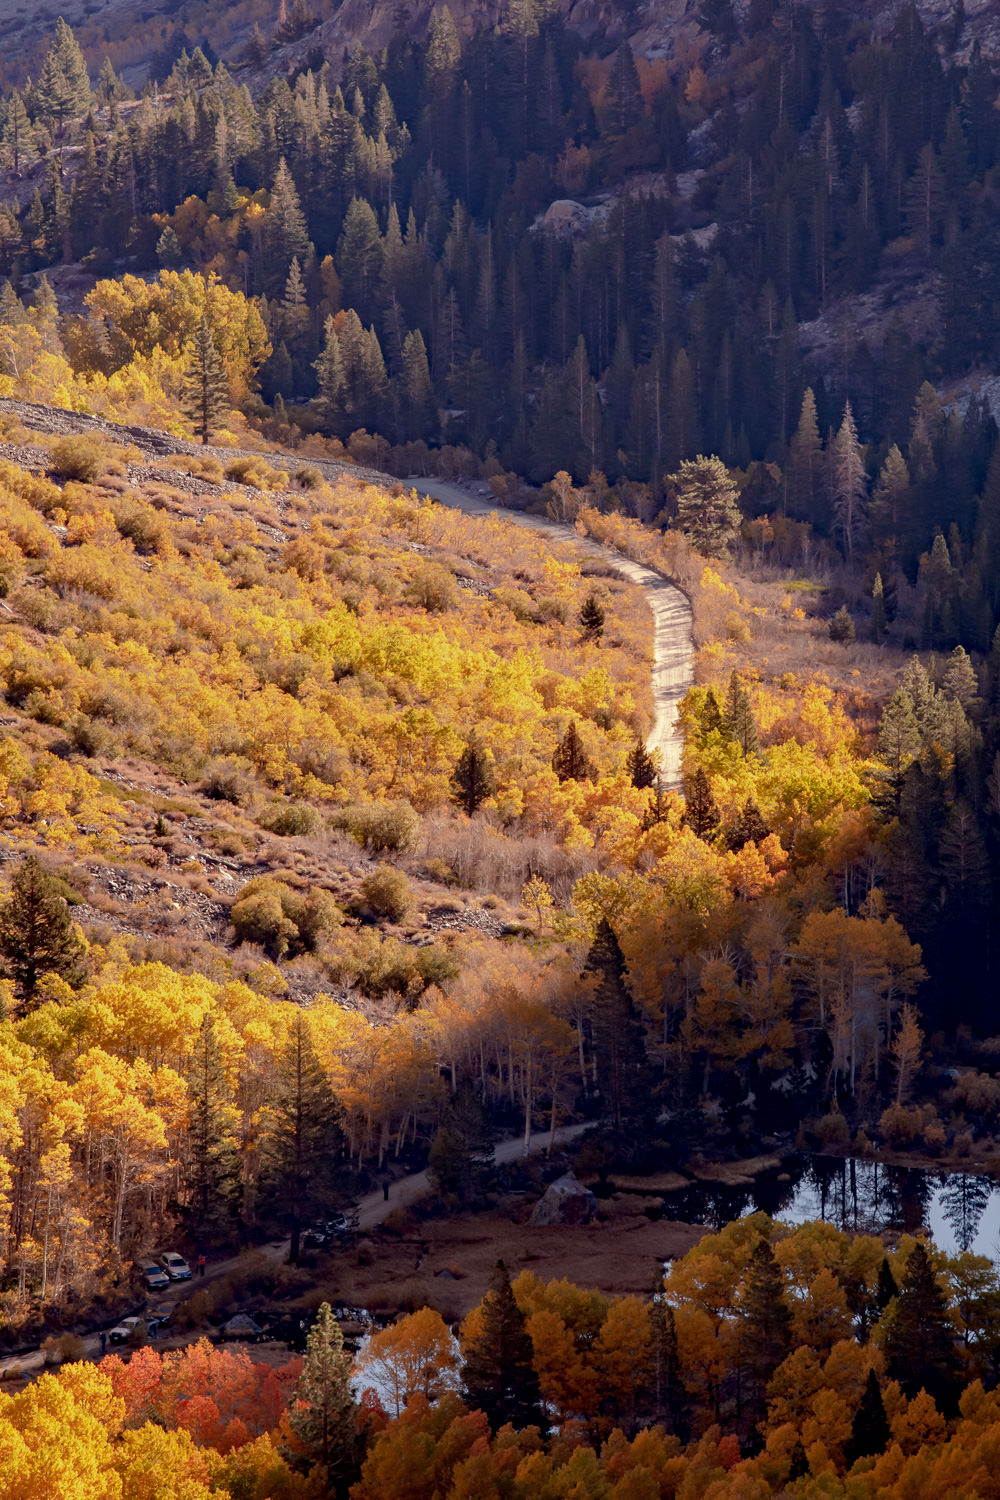 Lundy canyon road (October 2018)